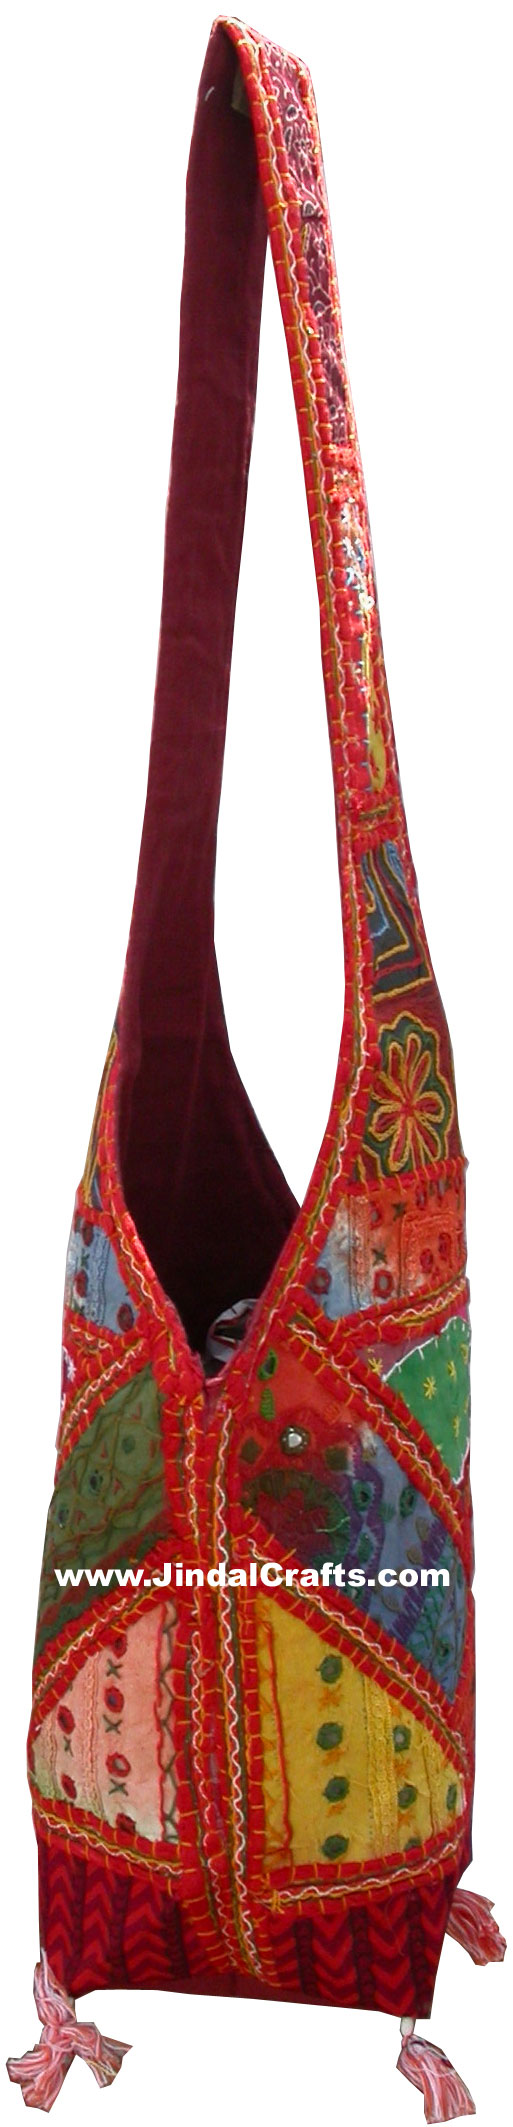 Colourful Hand Embroidered Patch Handbag from India 100 % Cotton Fabric Art